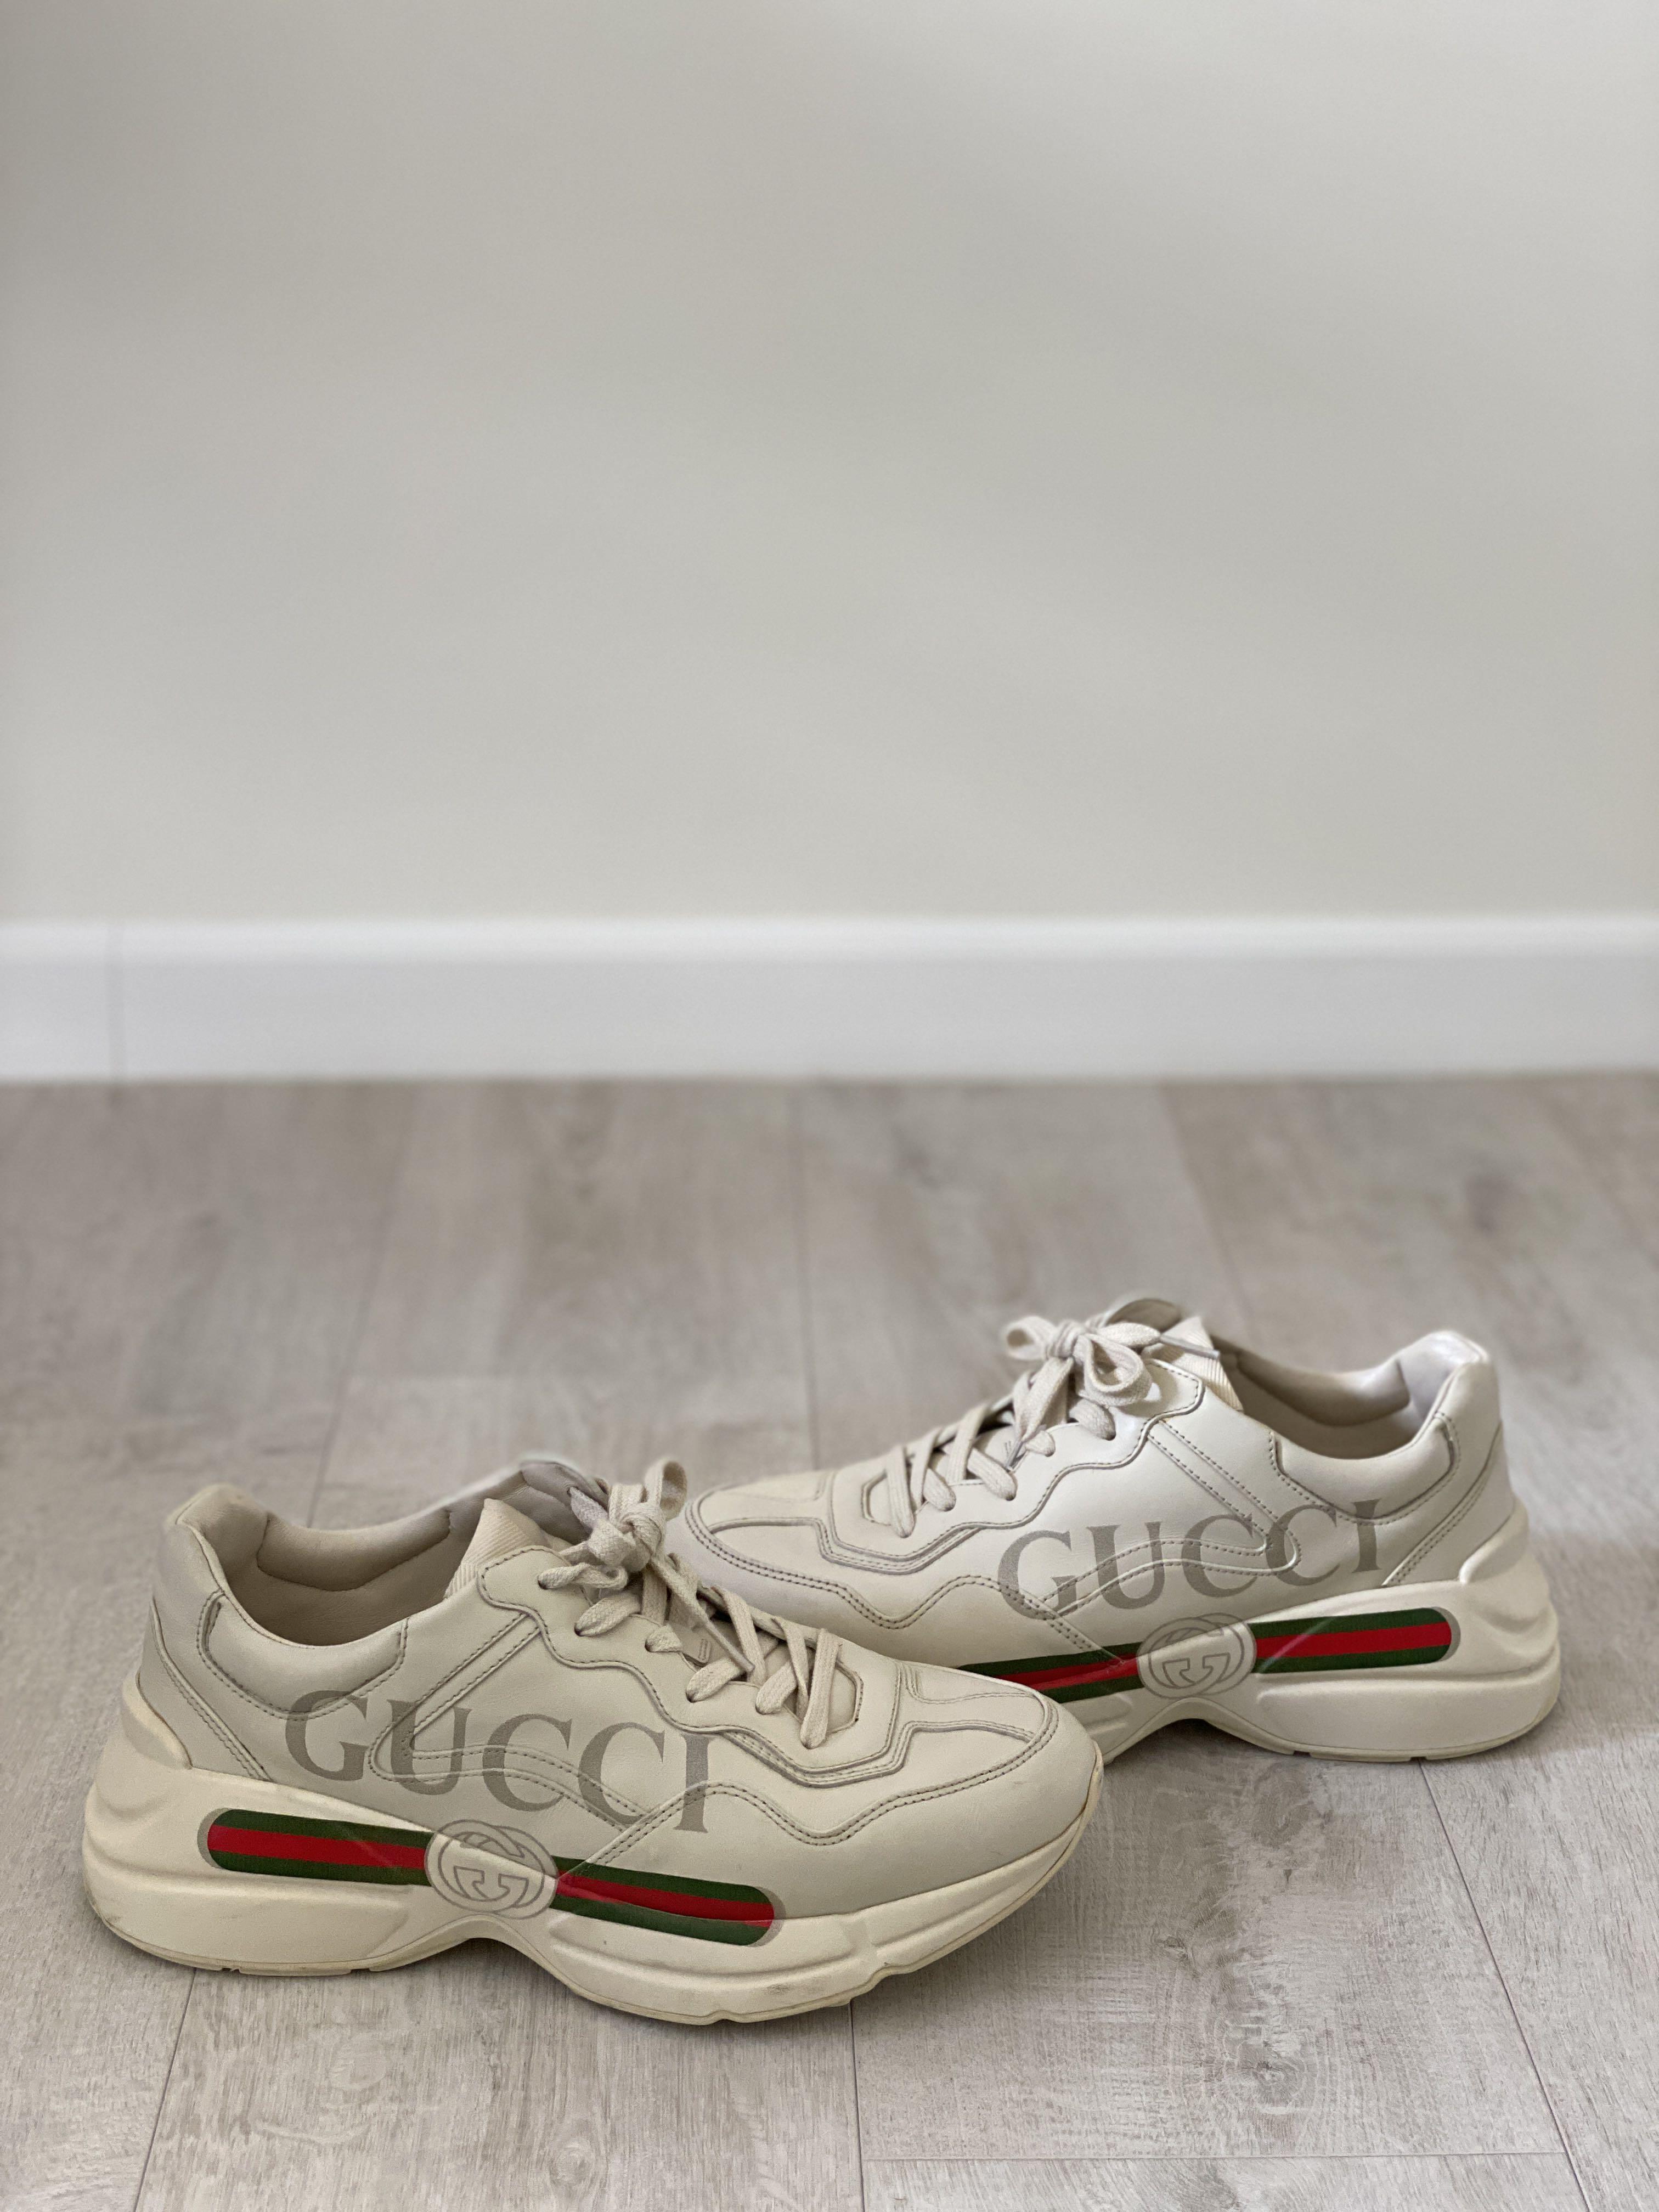 used gucci sneakers mens